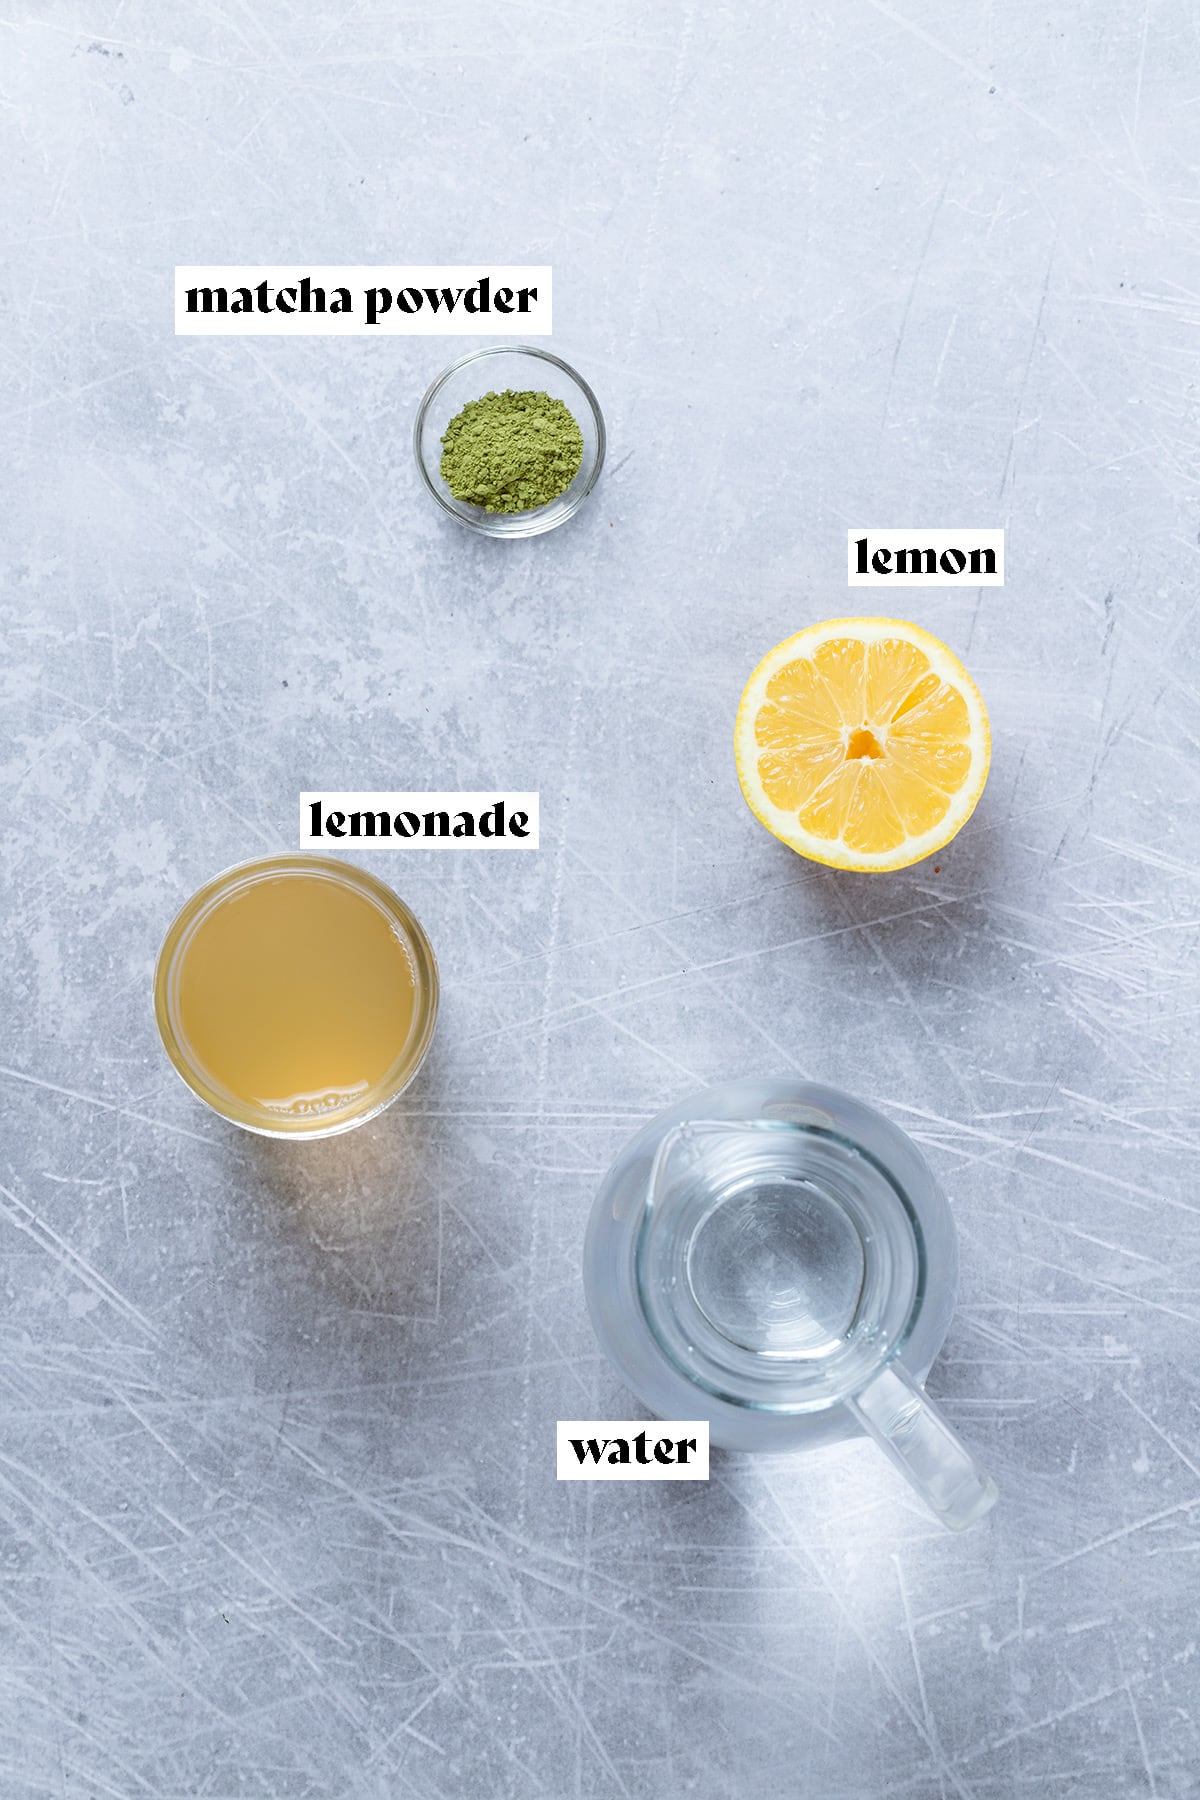 Matcha powder, lemonade, water, and a lemon laid out on a metal background.